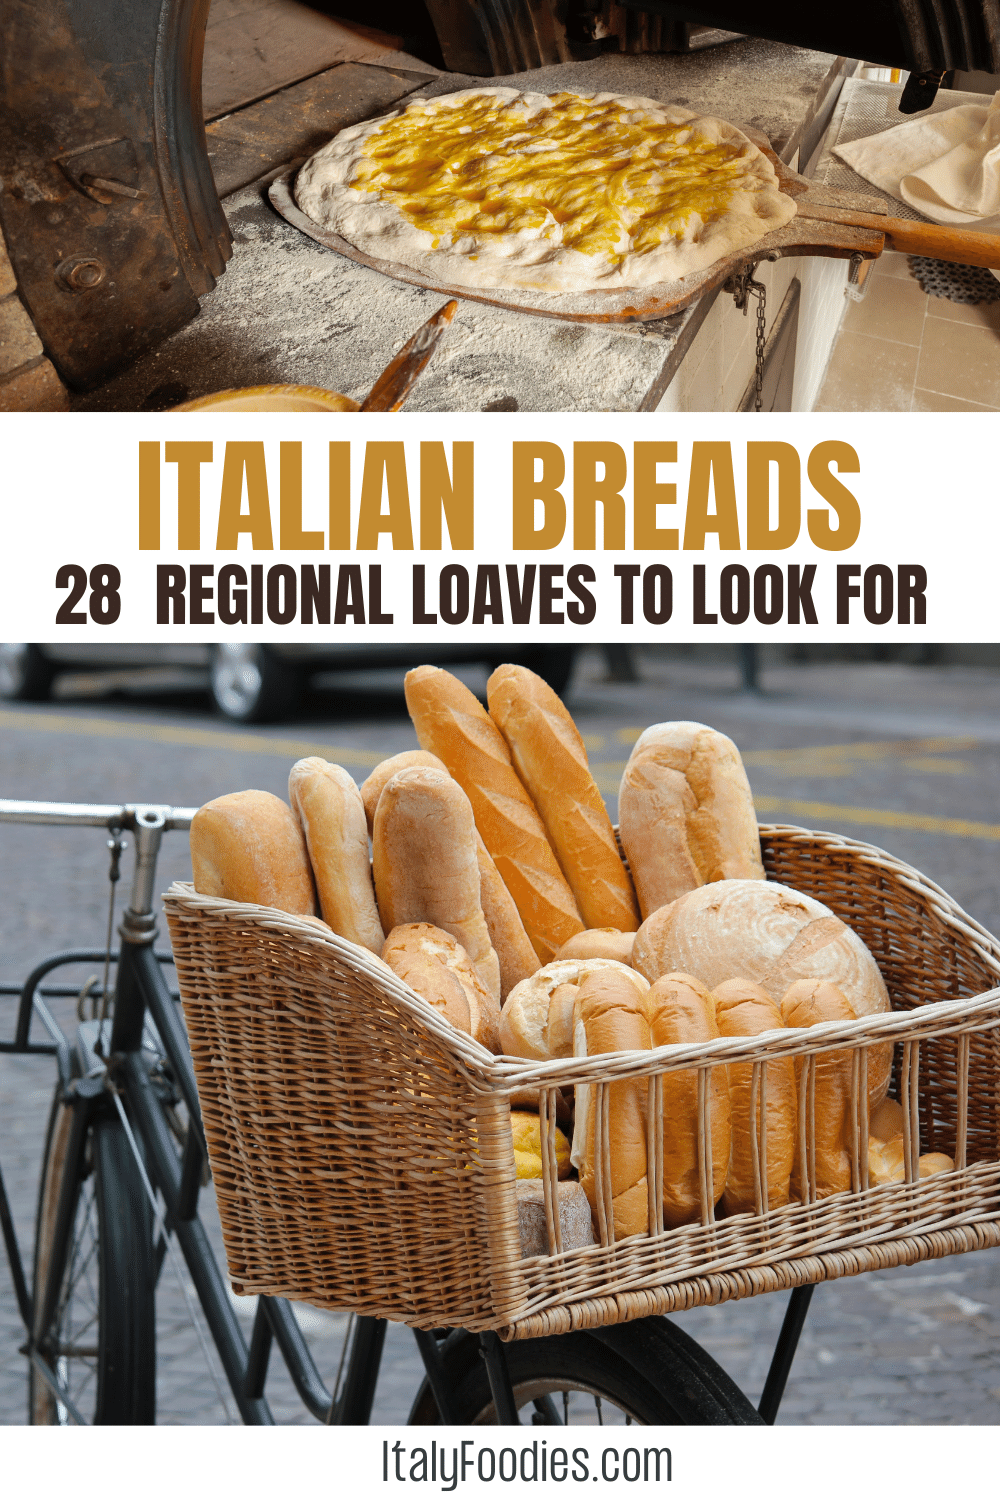 Italian Breads: 28 Regional Types of Italian Bread to Find Your Perfect Loaf